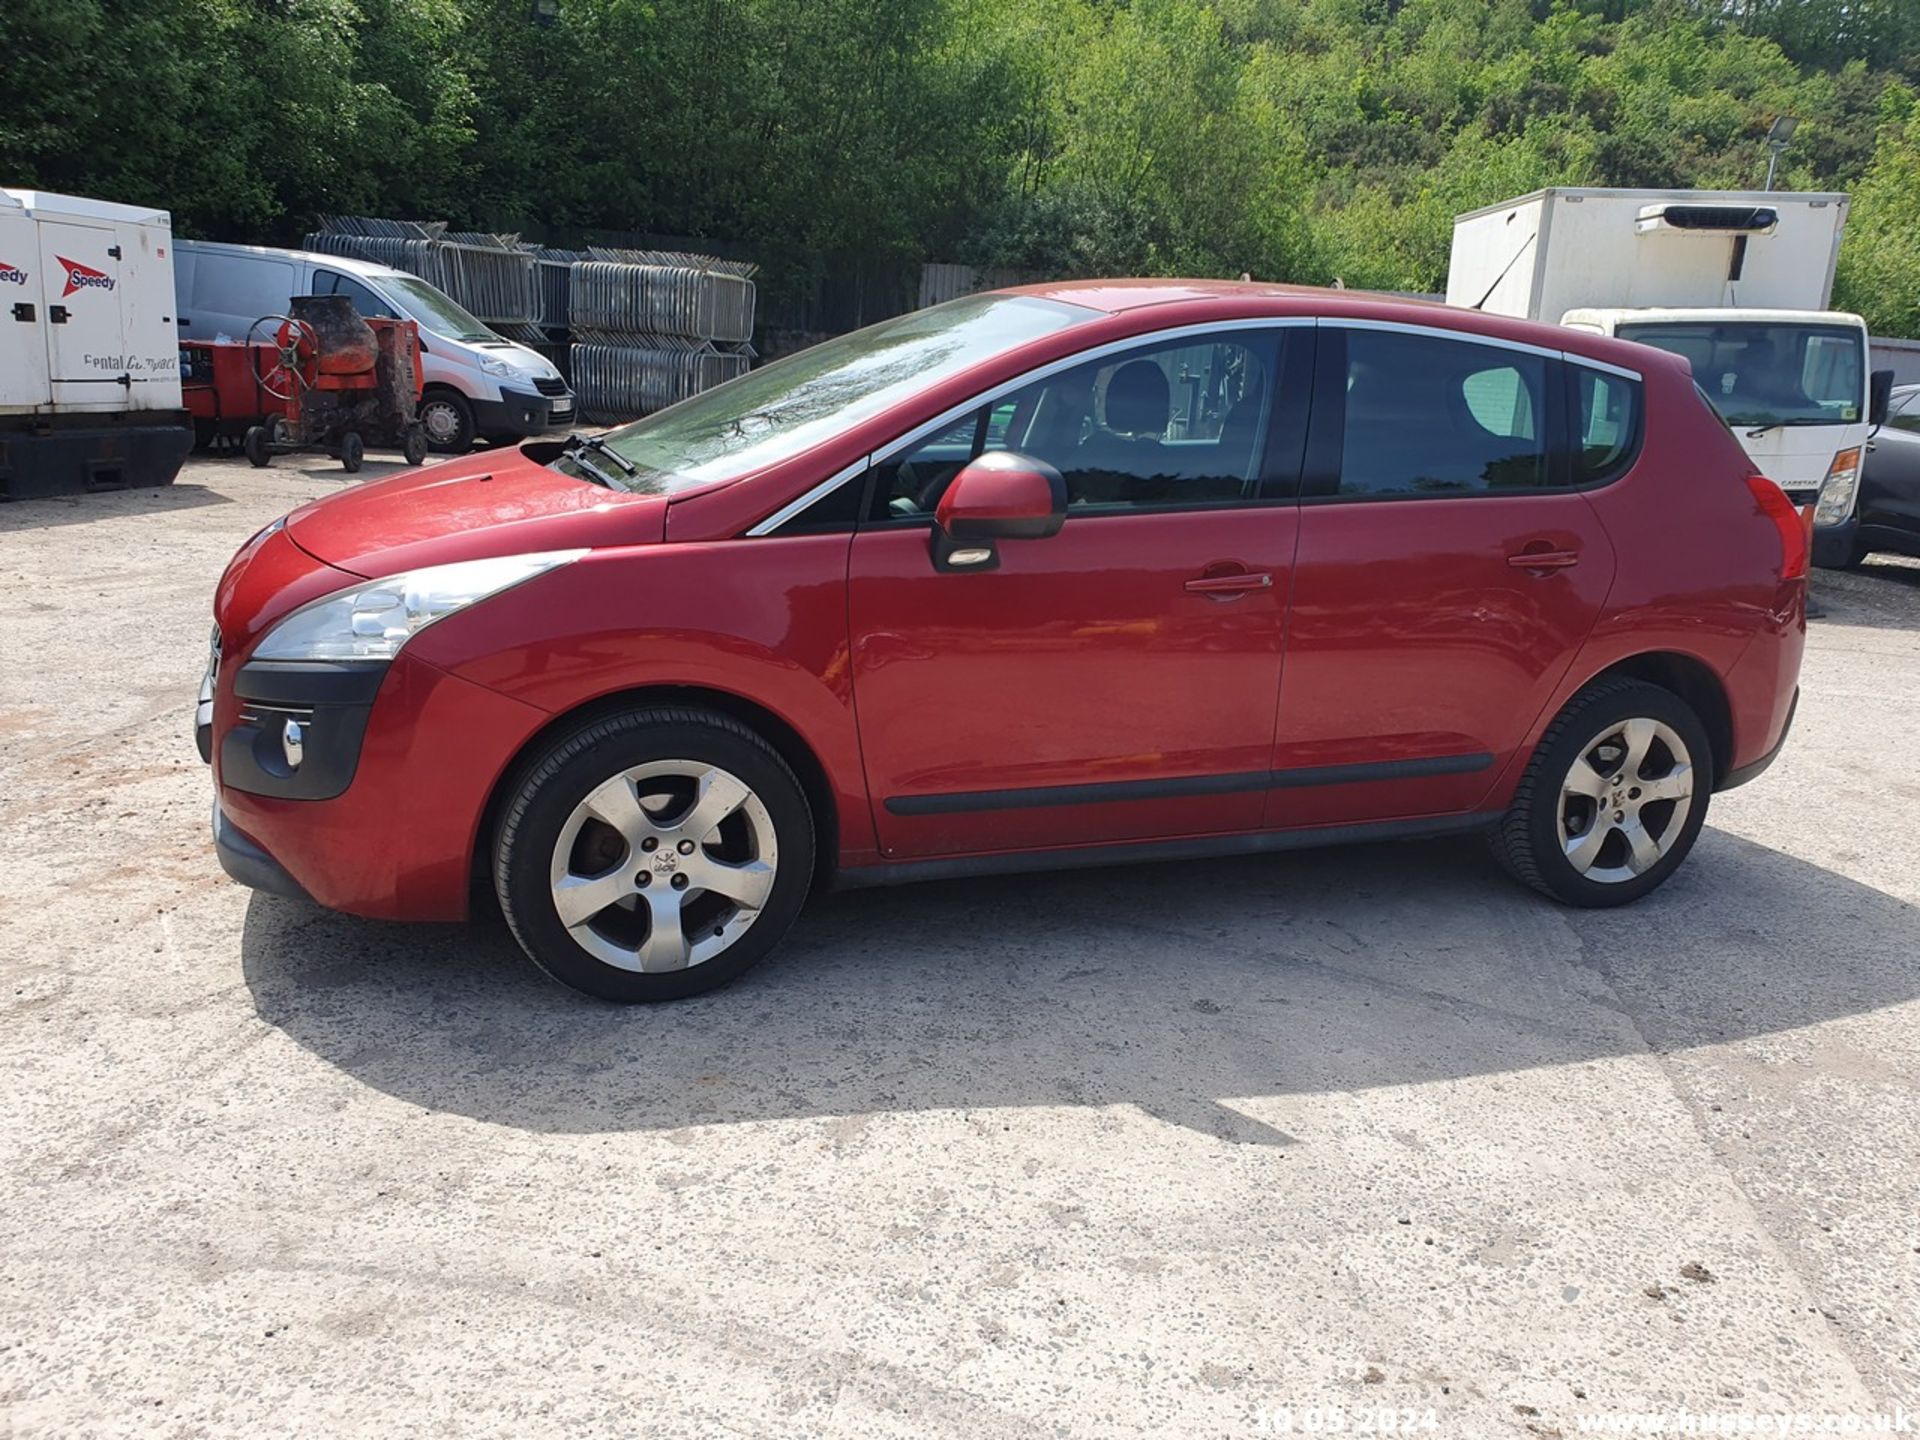 11/61 PEUGEOT 3008 SPORT E-HDI S-A - 1560cc 5dr Hatchback (Red, 89k) - Image 20 of 49